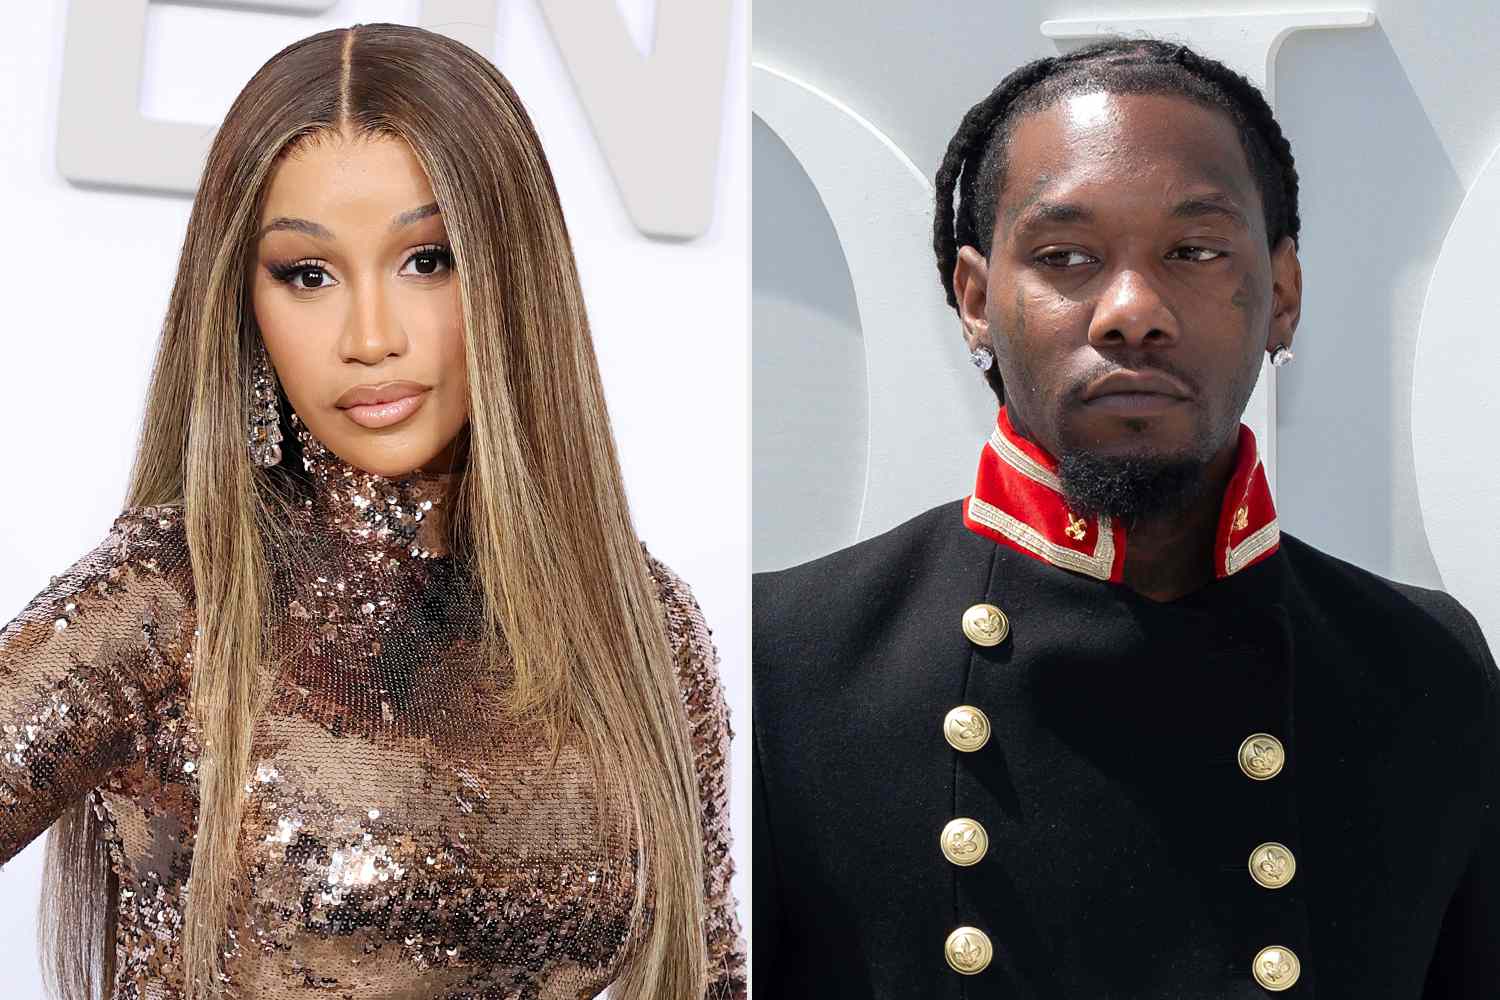 Cardi B confirms Offset breakup, says she has “been single for a minute”